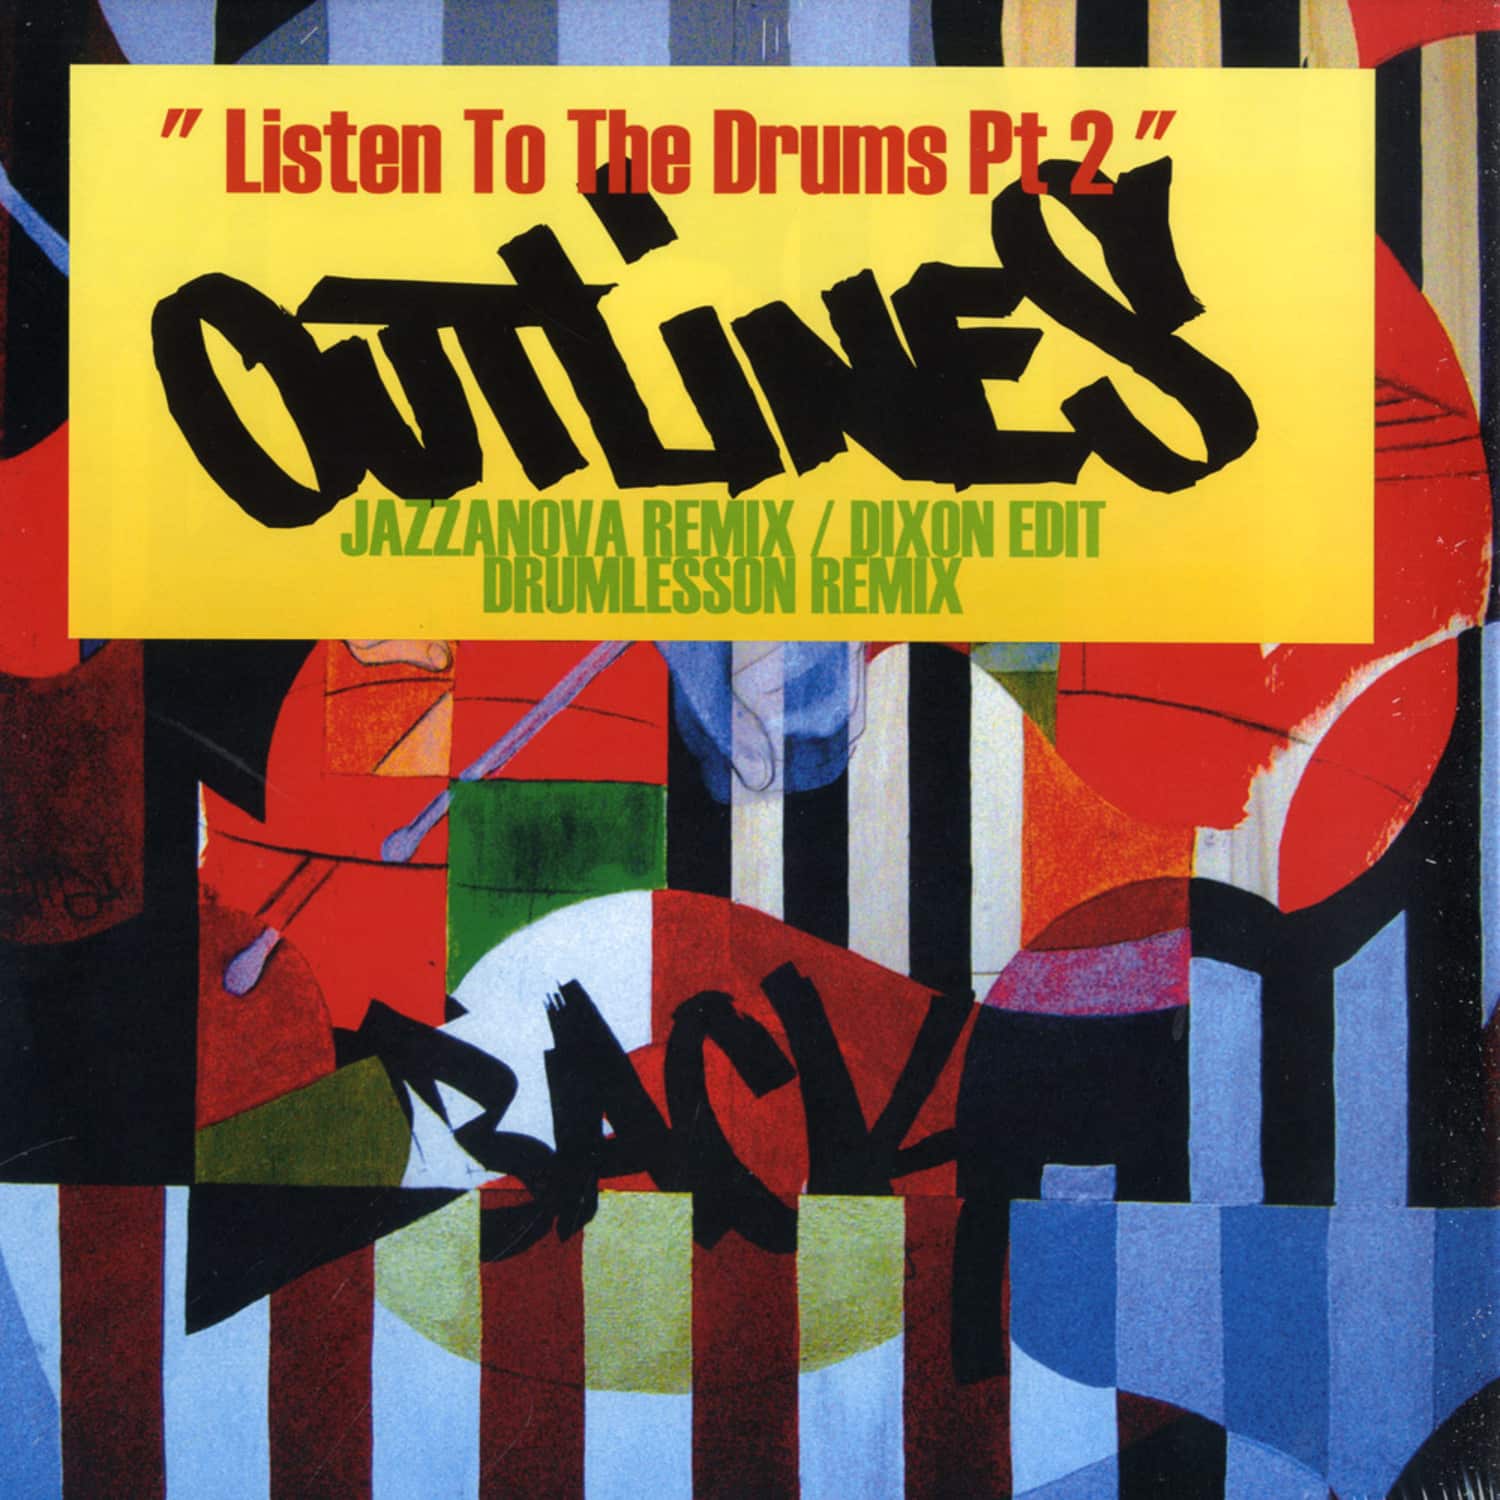 Outlines - LITEN TO THE DRUMS PT 2 